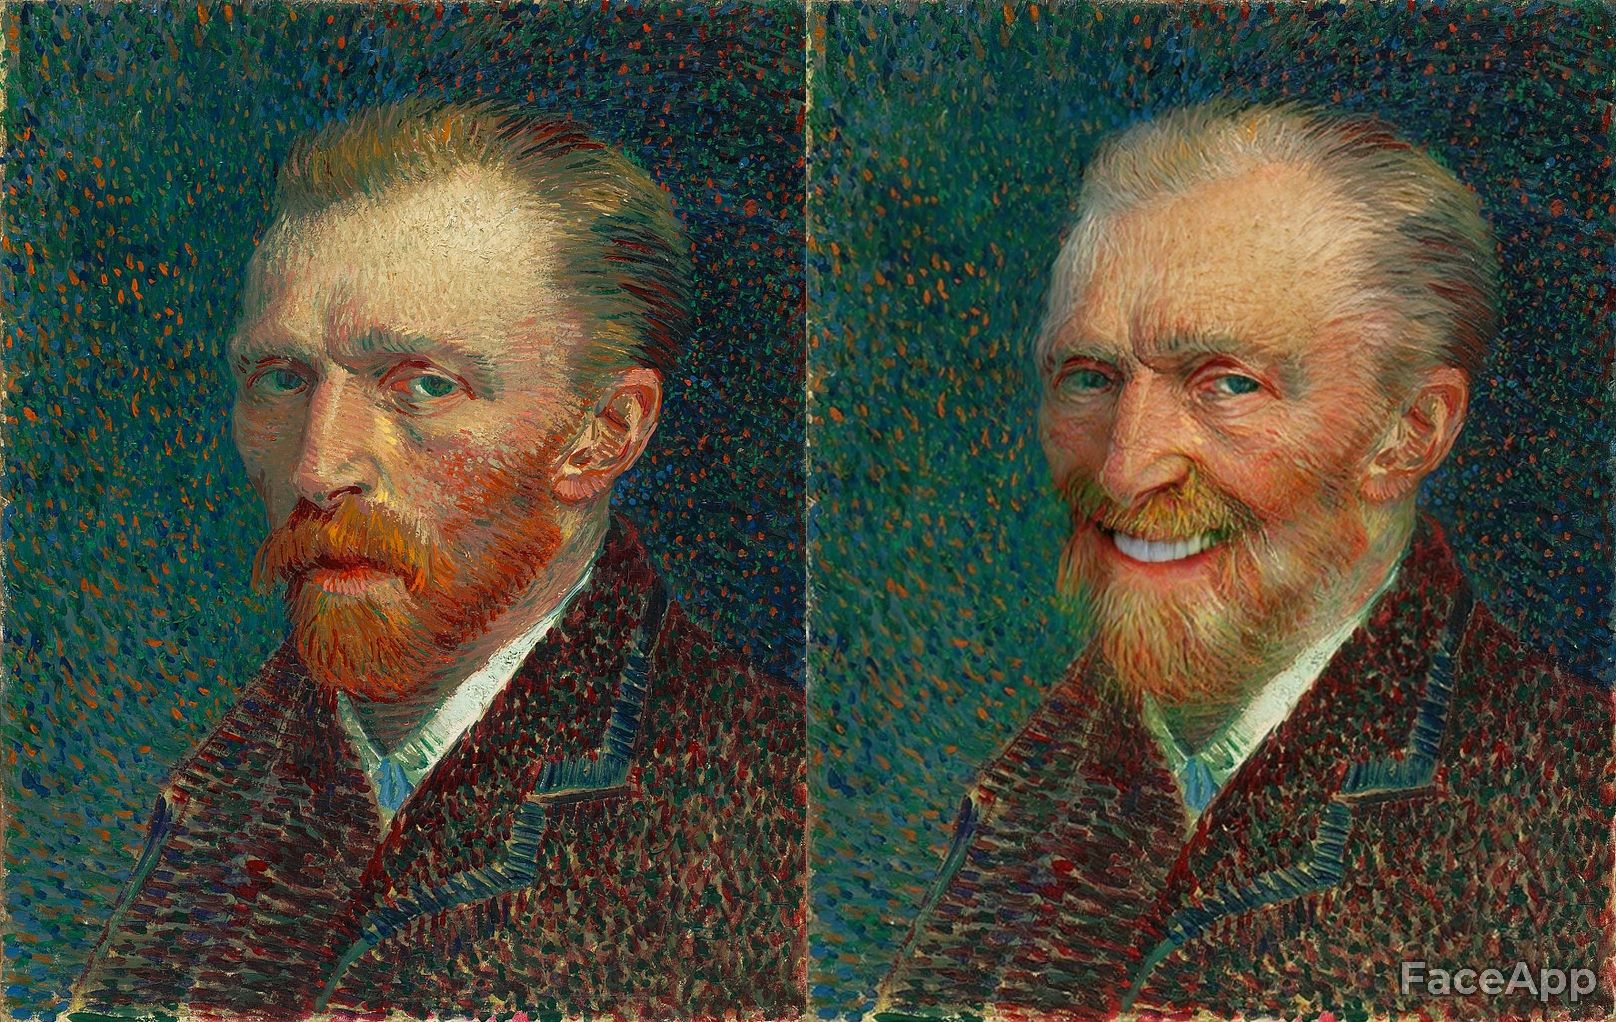 Artwork Re-imagined With Ai Smiles And Old Age Filters image 15